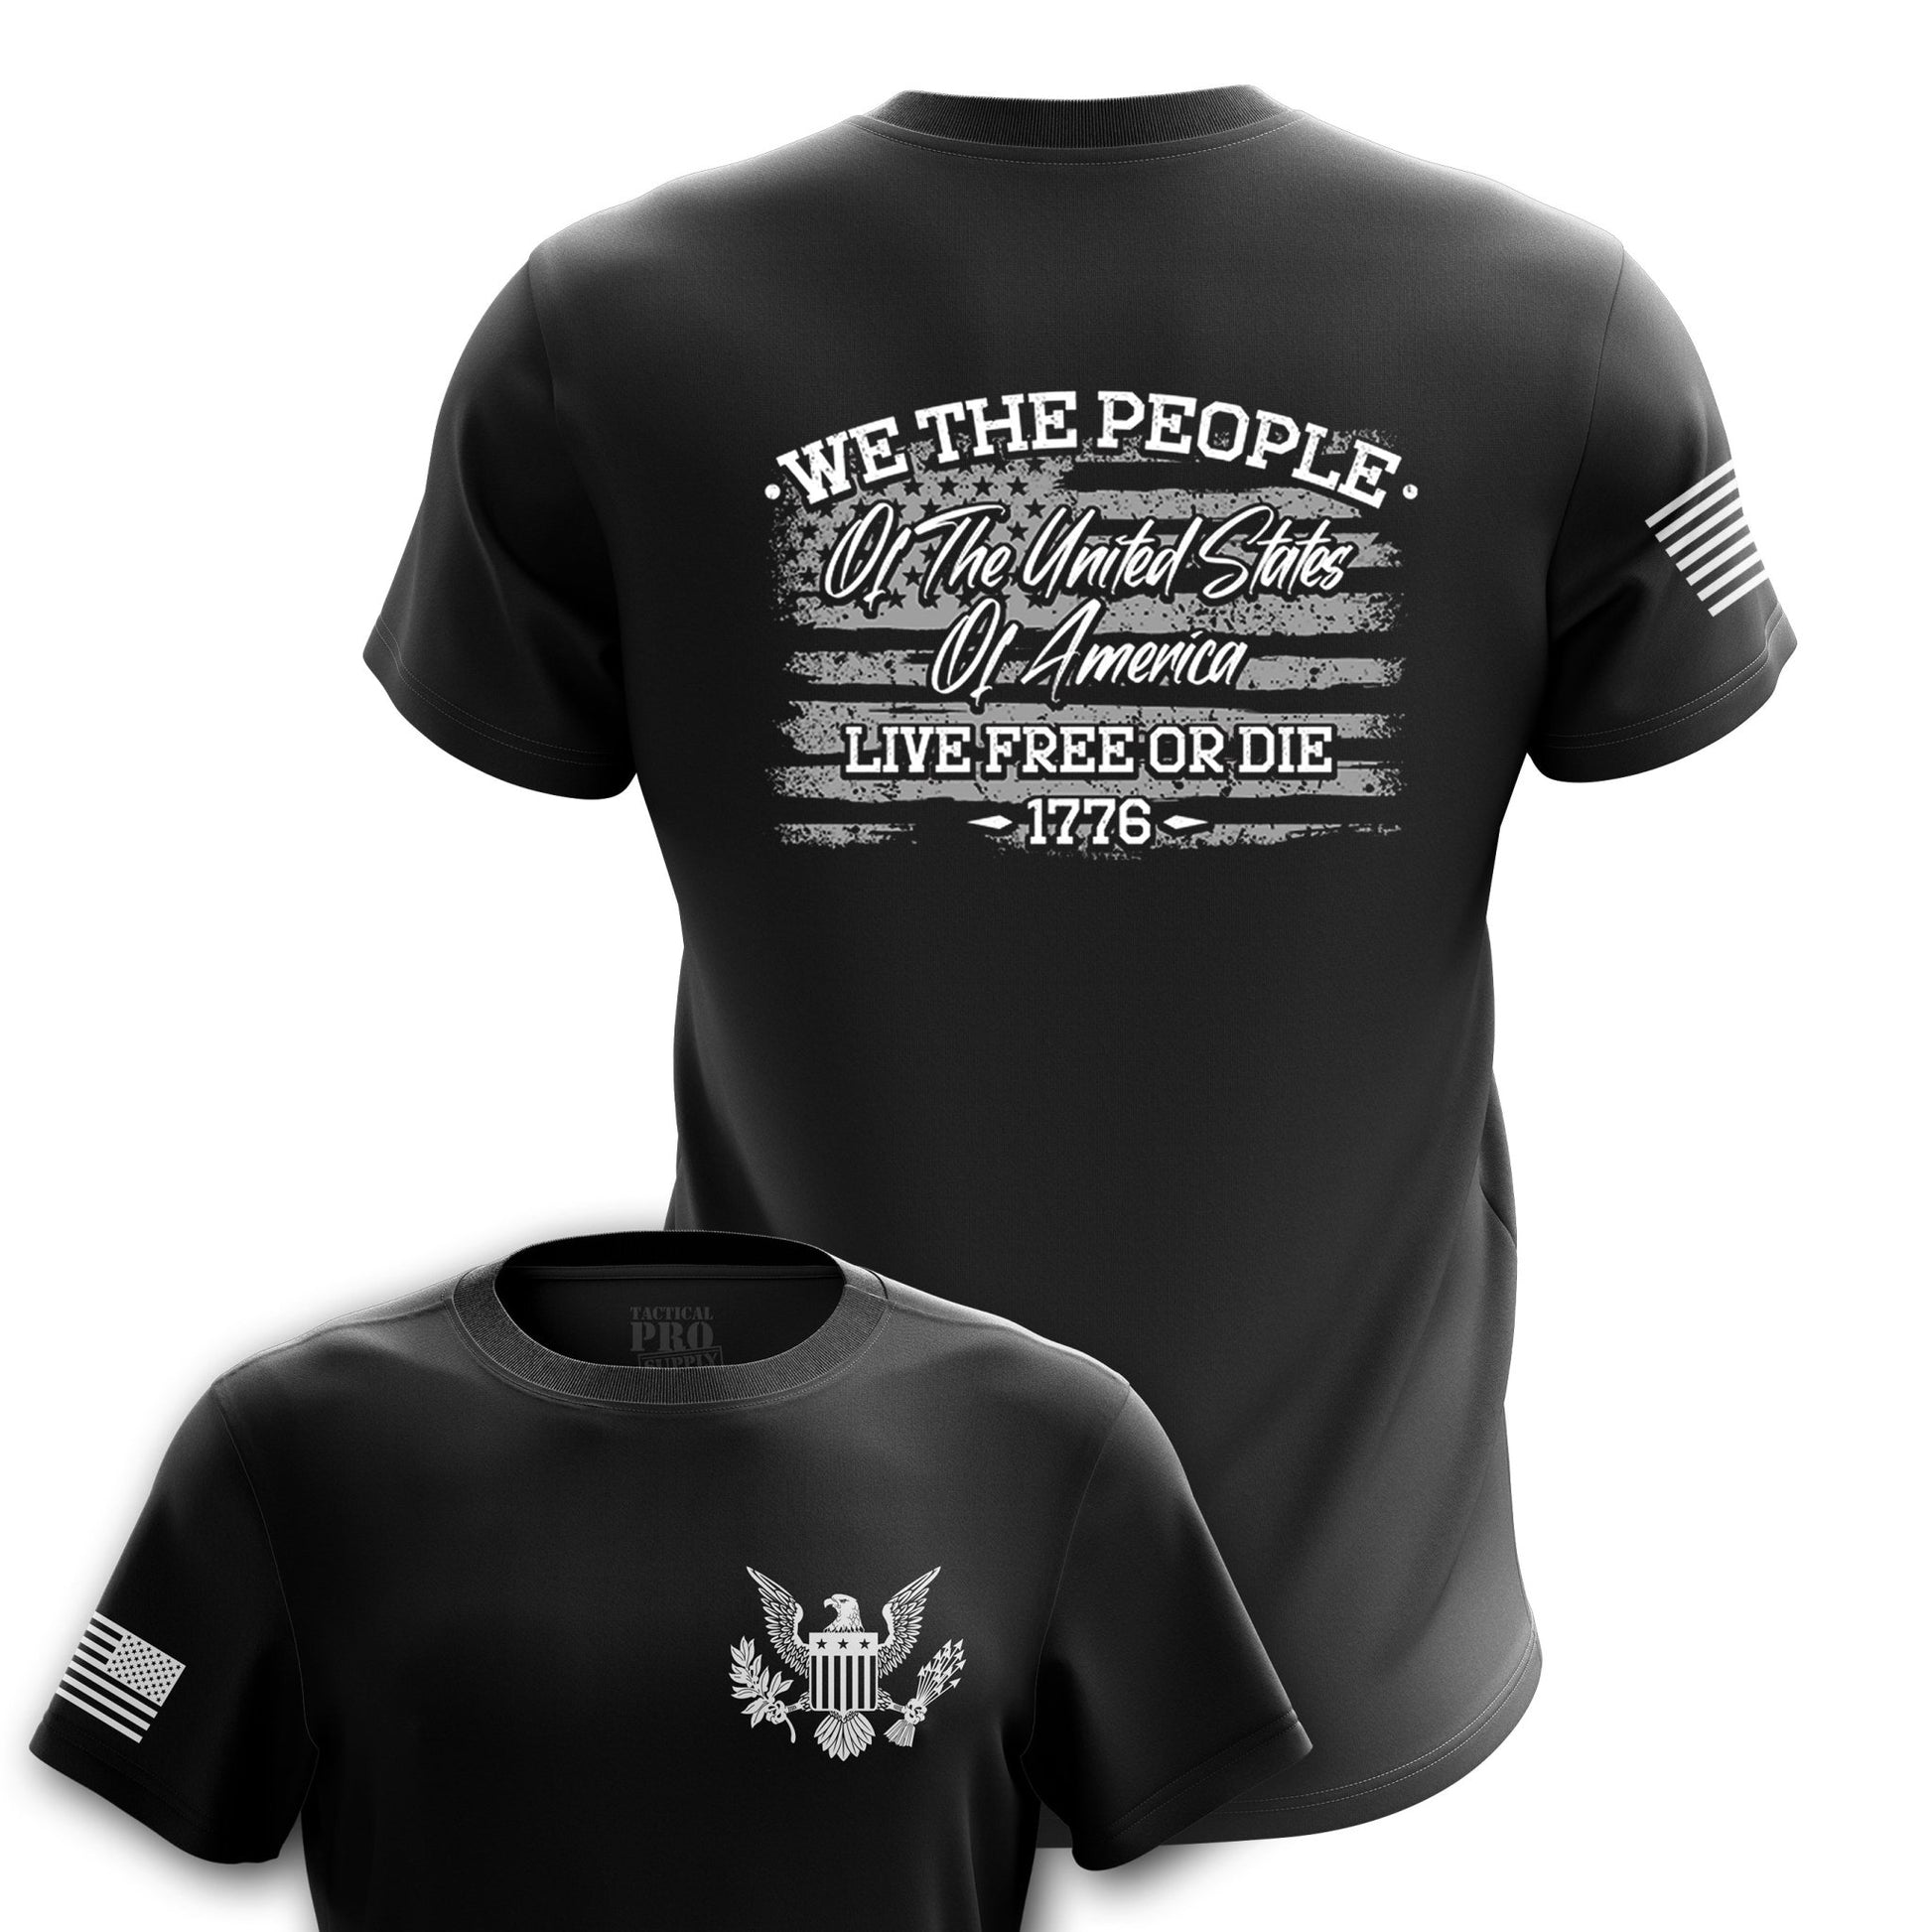 We the People v2 - Tactical Pro Supply, LLC